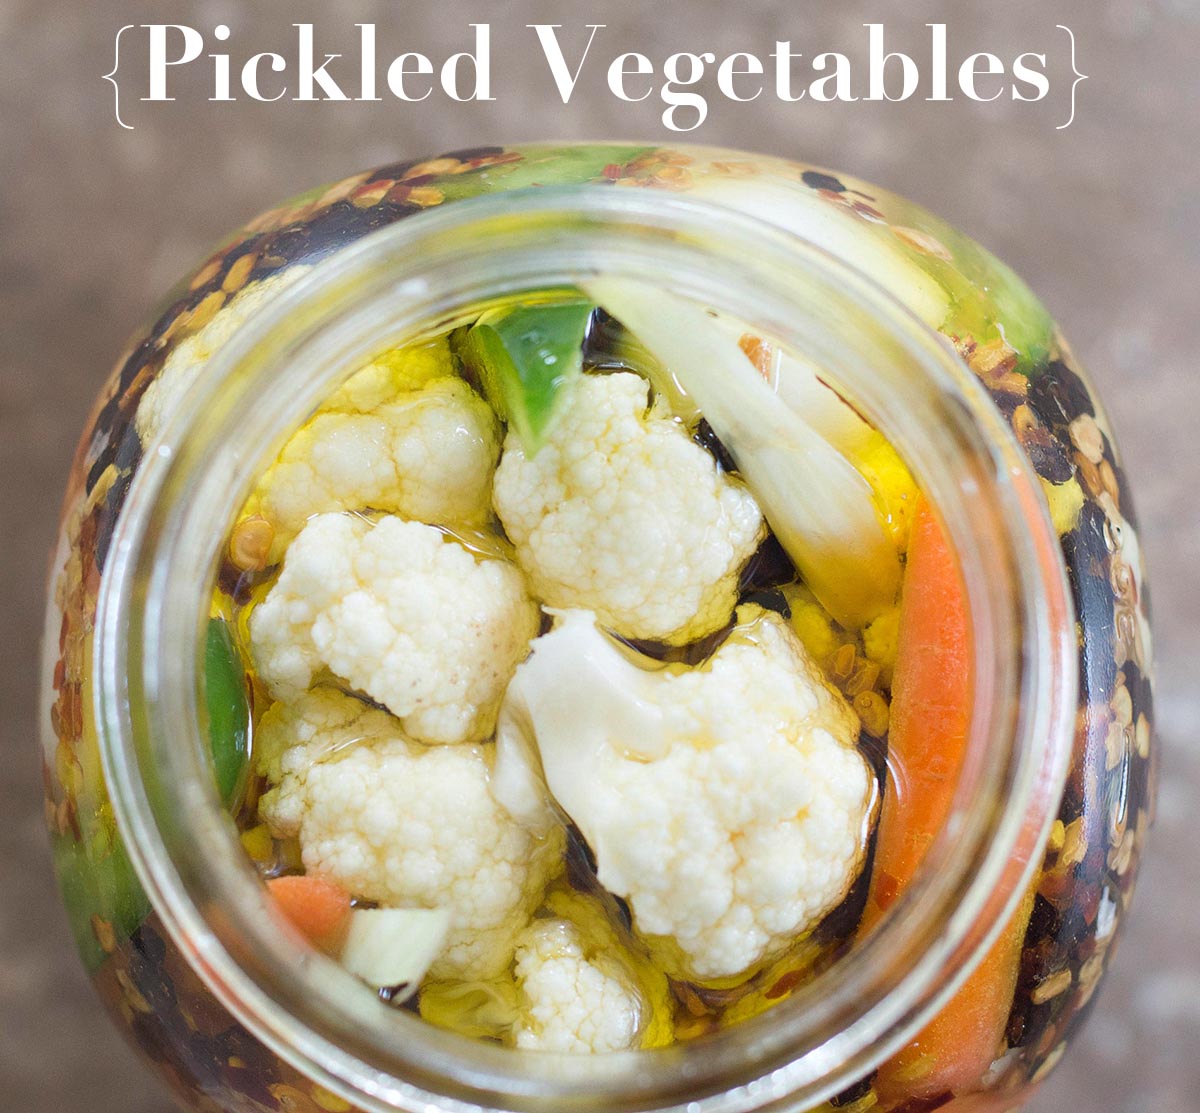 Pickled vegetables are easy to make using cauliflower, peppers, fennel, onions, garlic and carrots. Put any veggies in a simple vinegar and oil brine